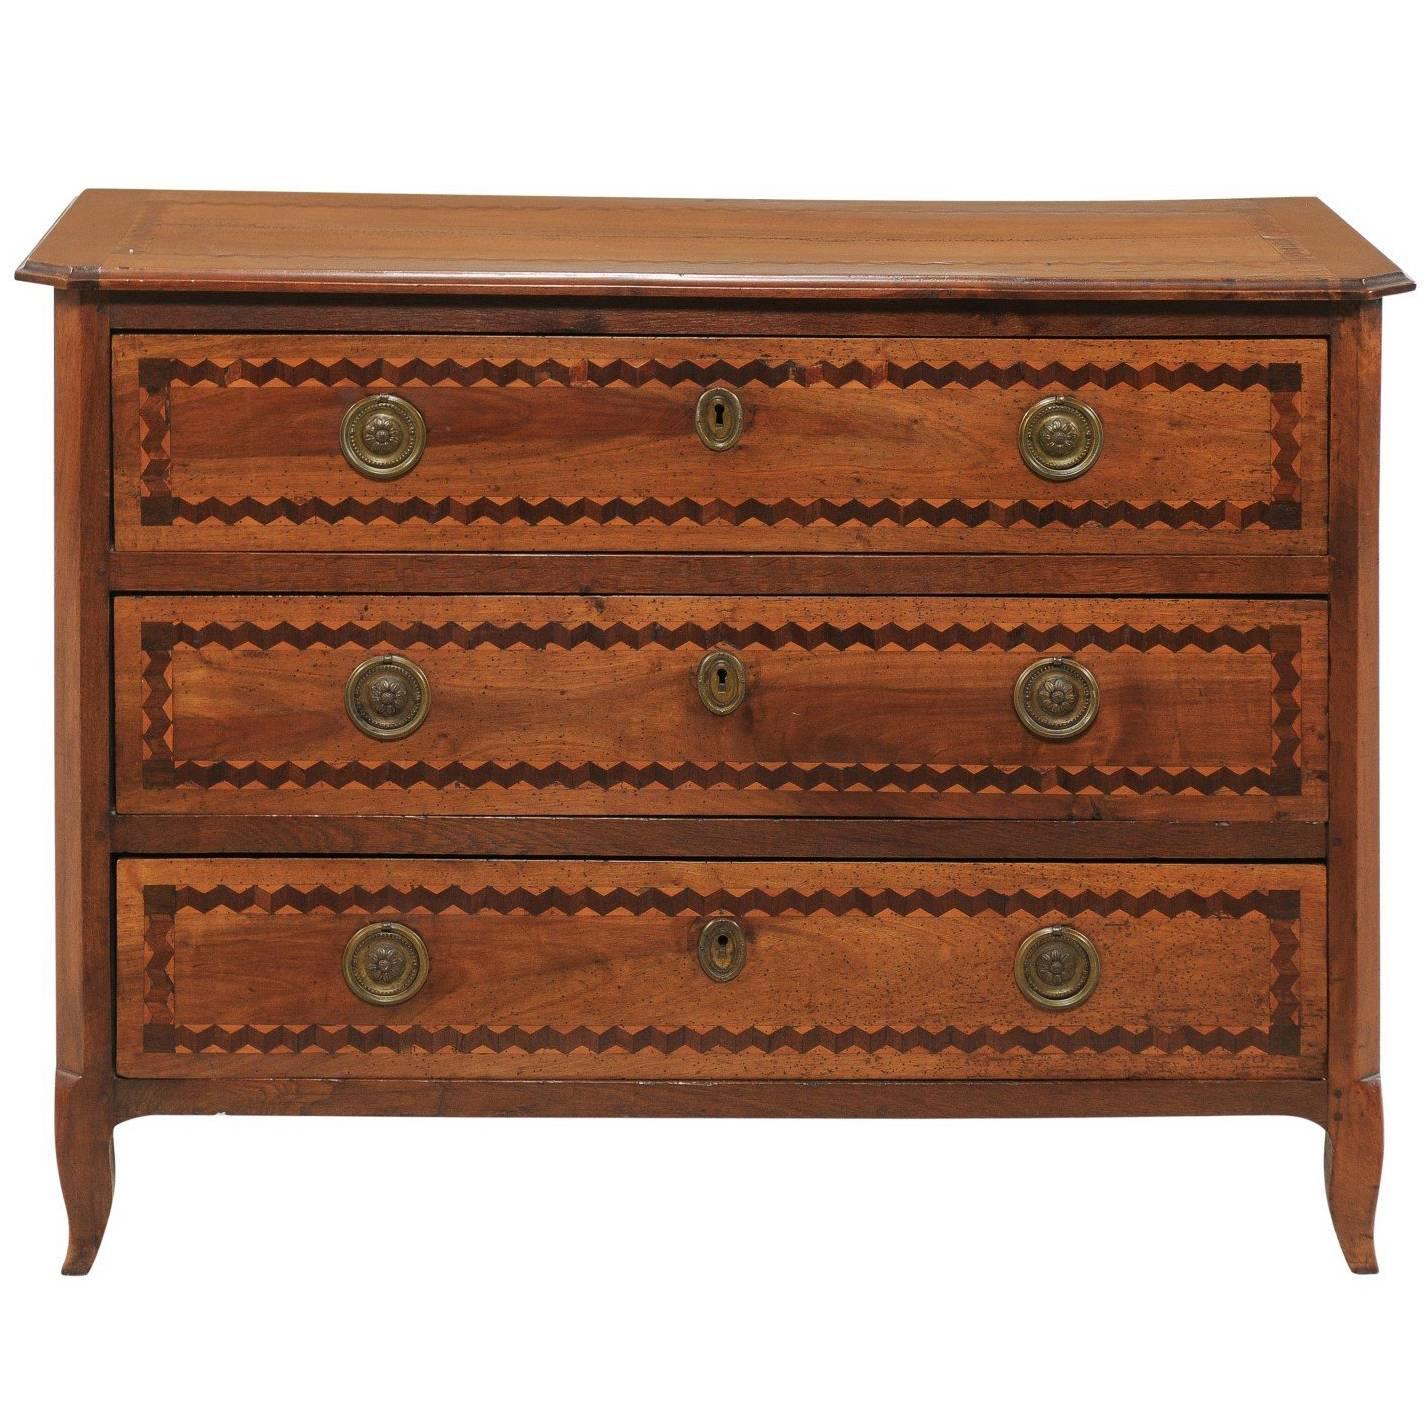 Italian Early 19th Century Inlaid Three-Drawer Commode with Zigzag Motifs